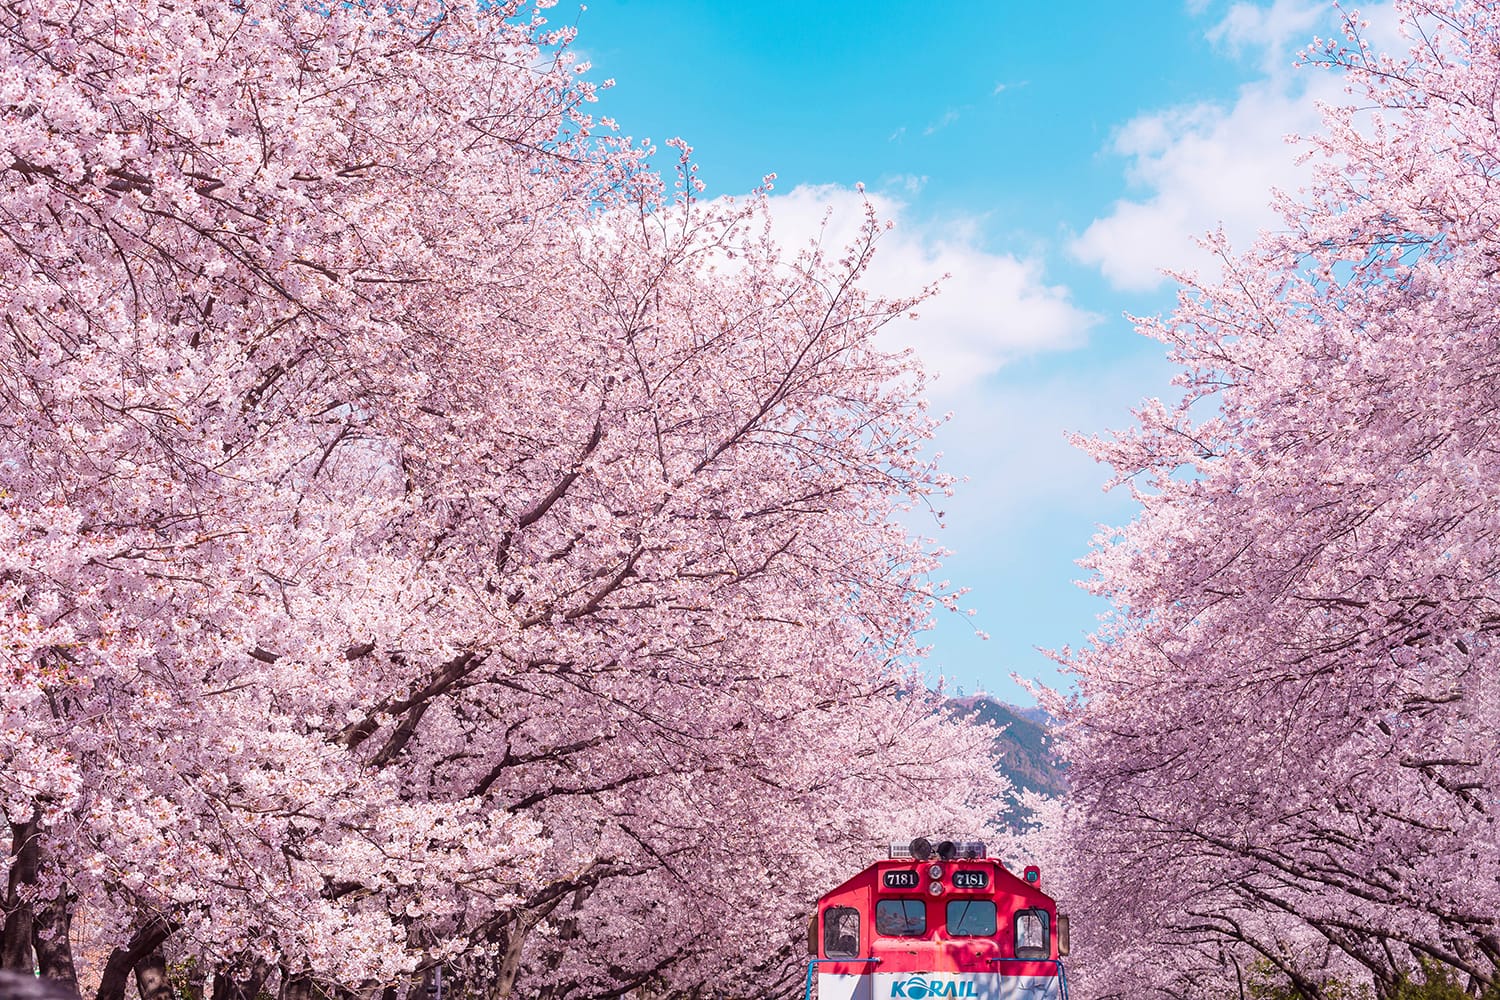 Cherry blossom with train in Jinhae, South Korea